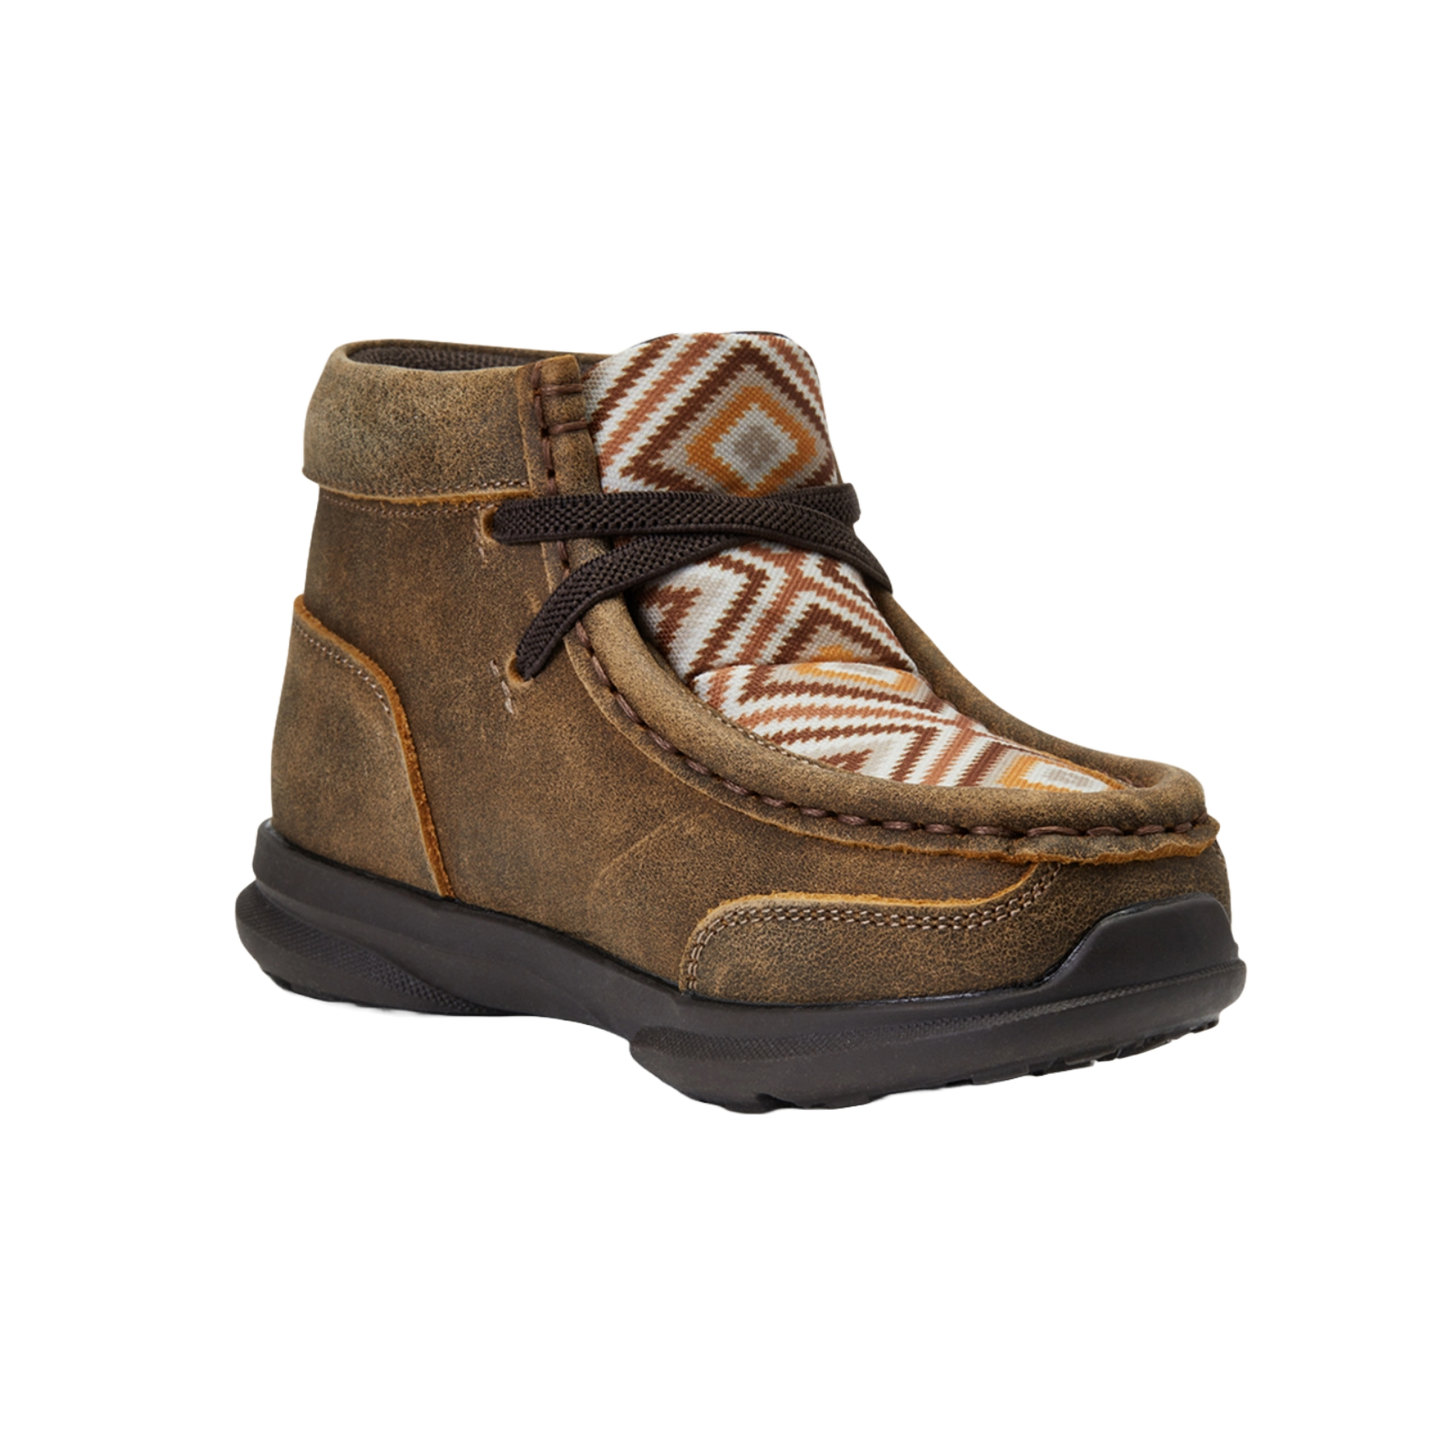 Ariat Toddler Boy's Lil Stomper Jaime Brown Shoes A443000902